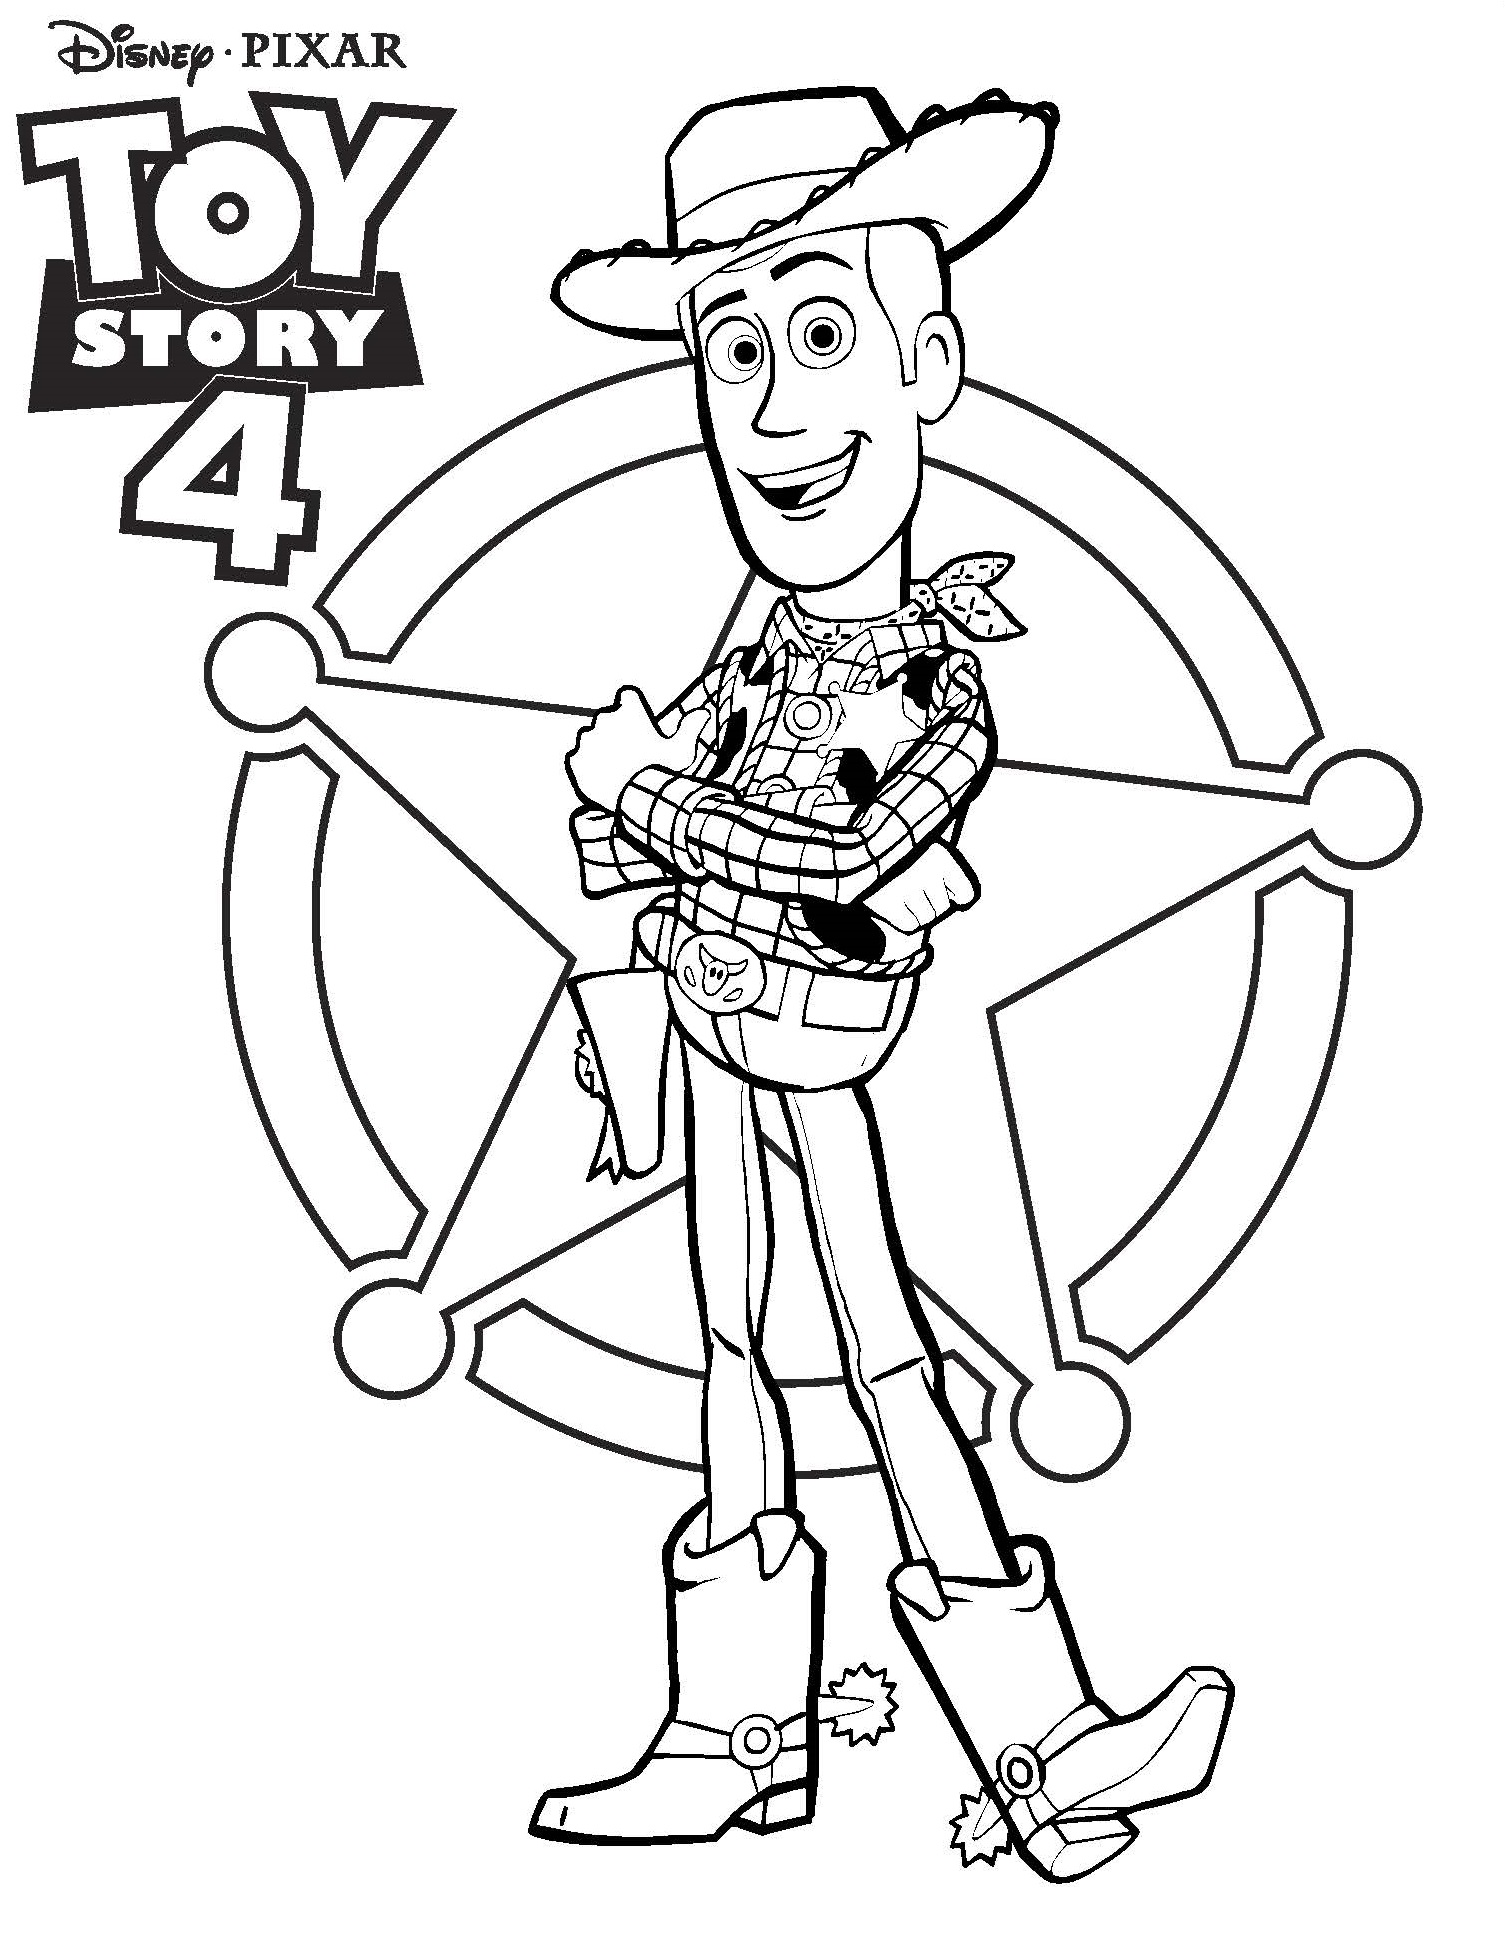 Forky Toy Story 20 coloring page Disney / Pixar Toy Story 20 ...